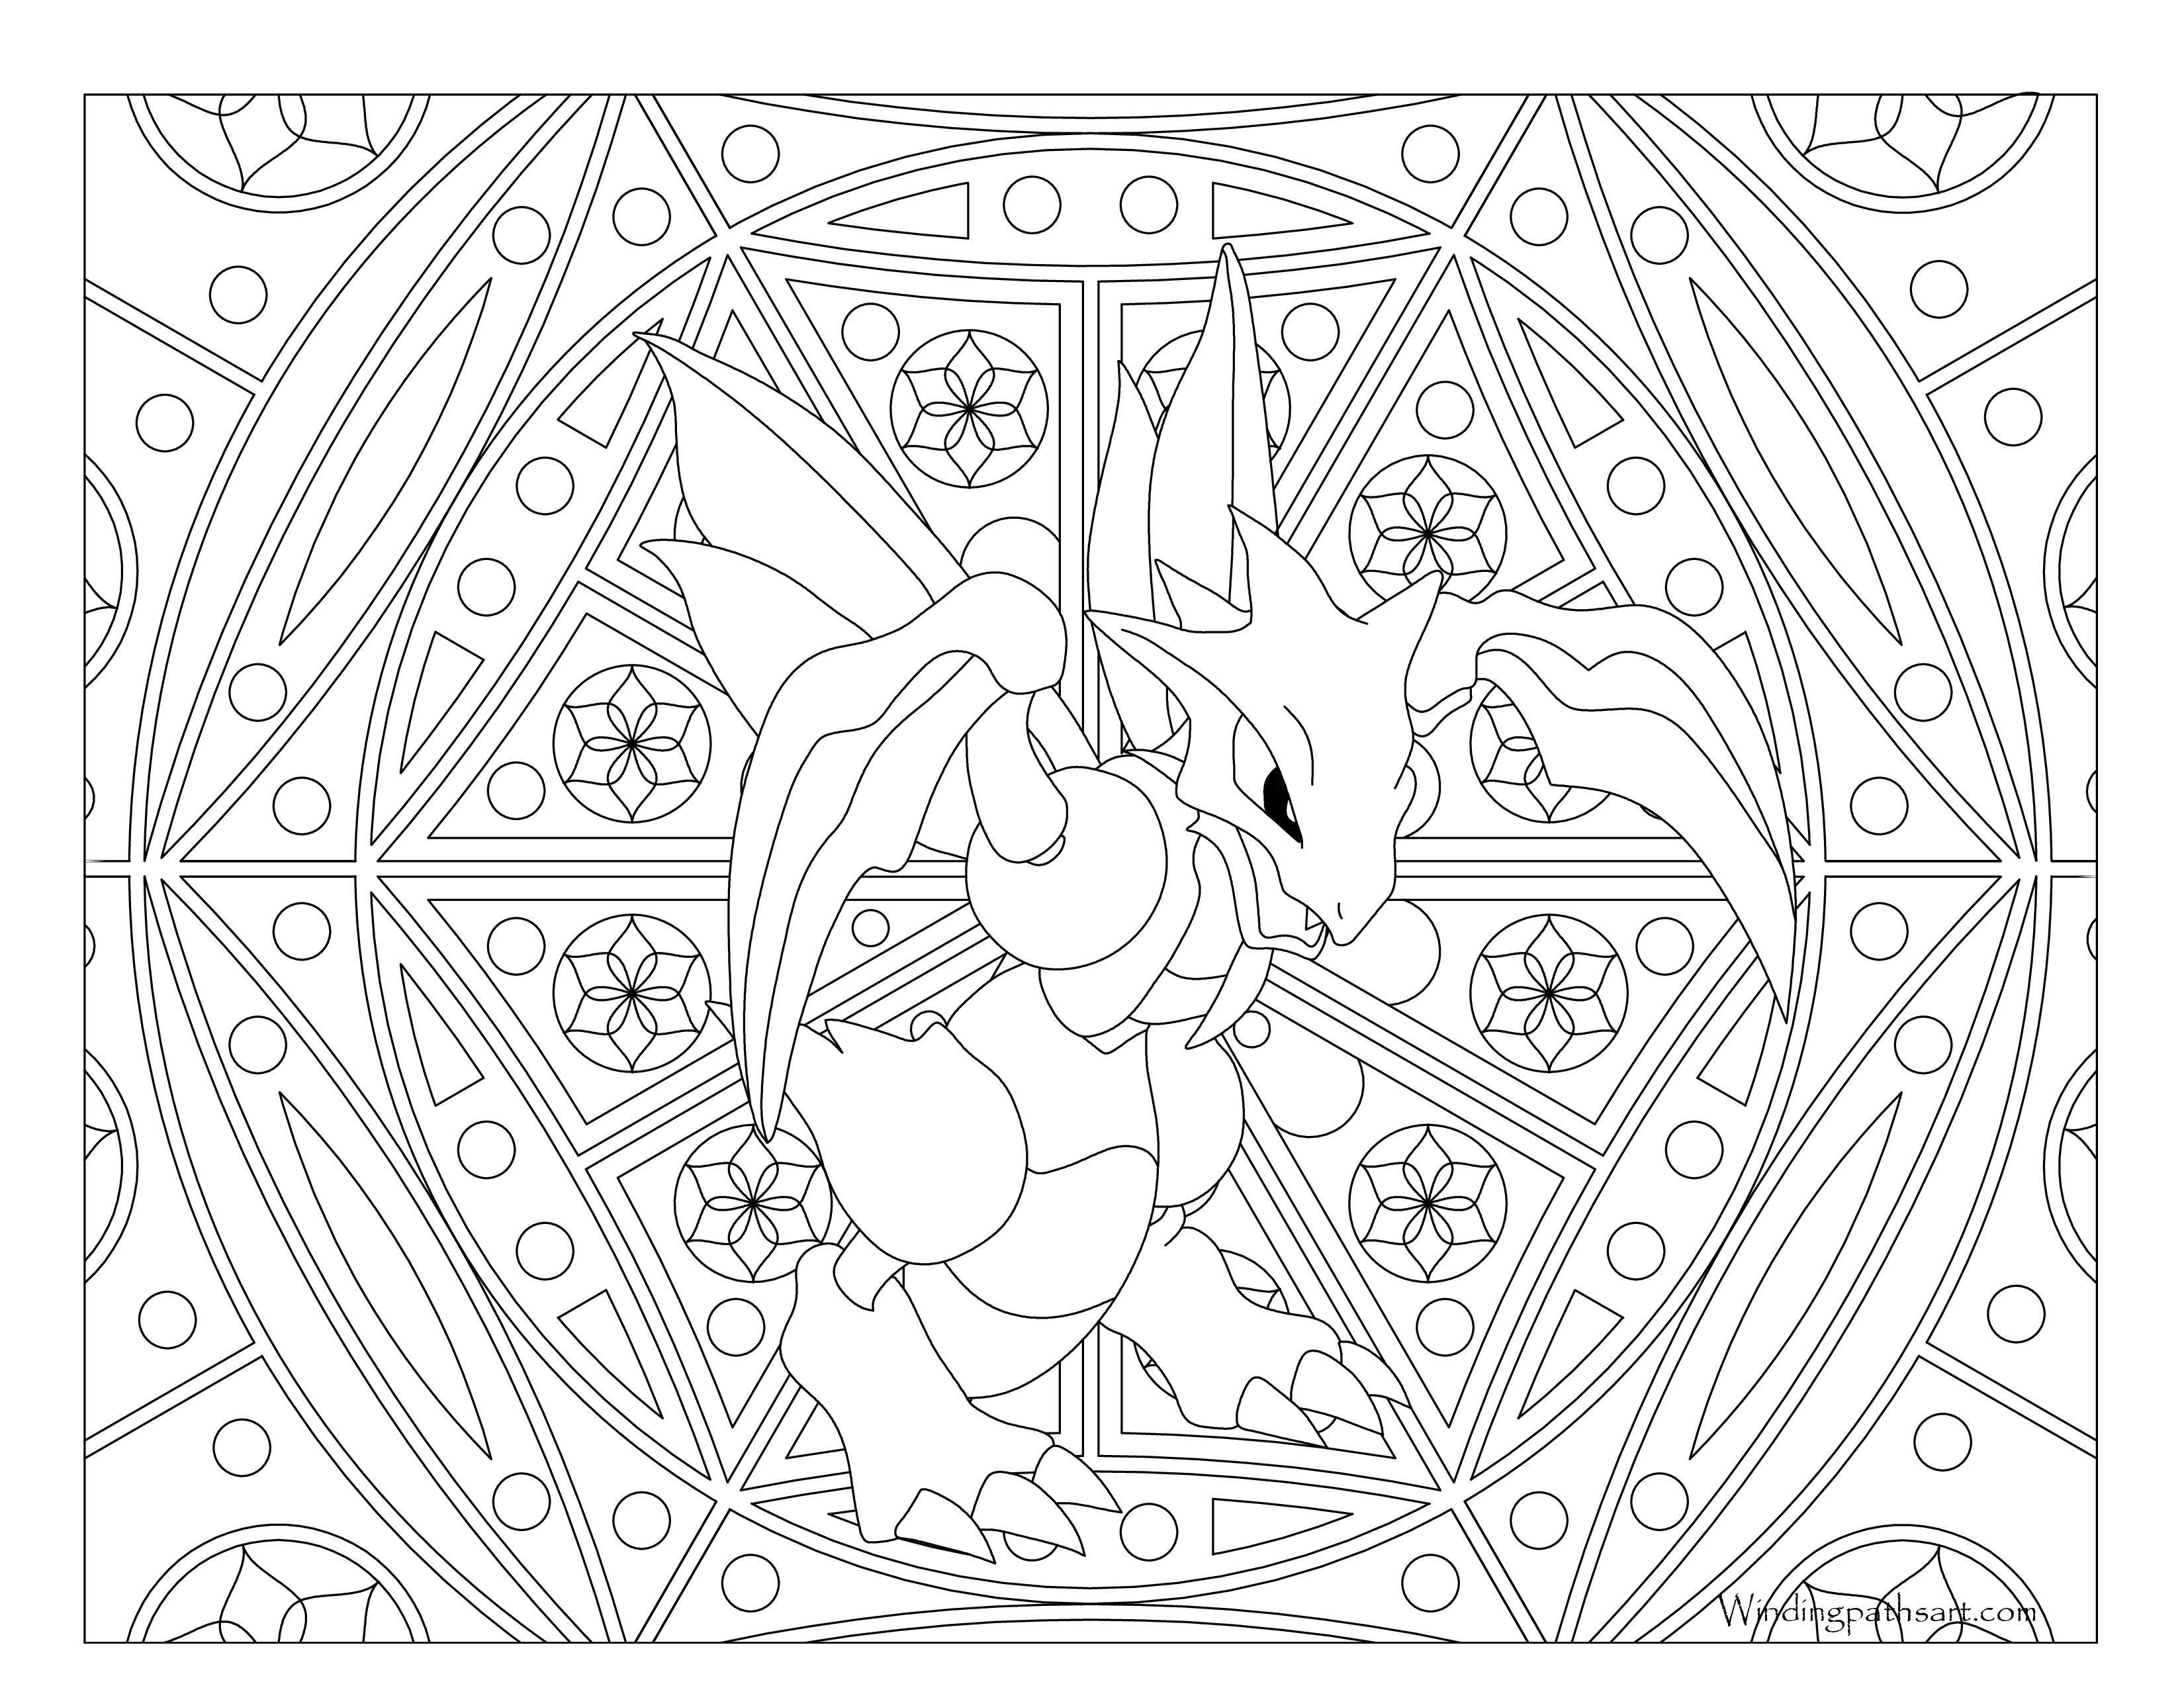 Adult Pokemon Coloring Page Scyther